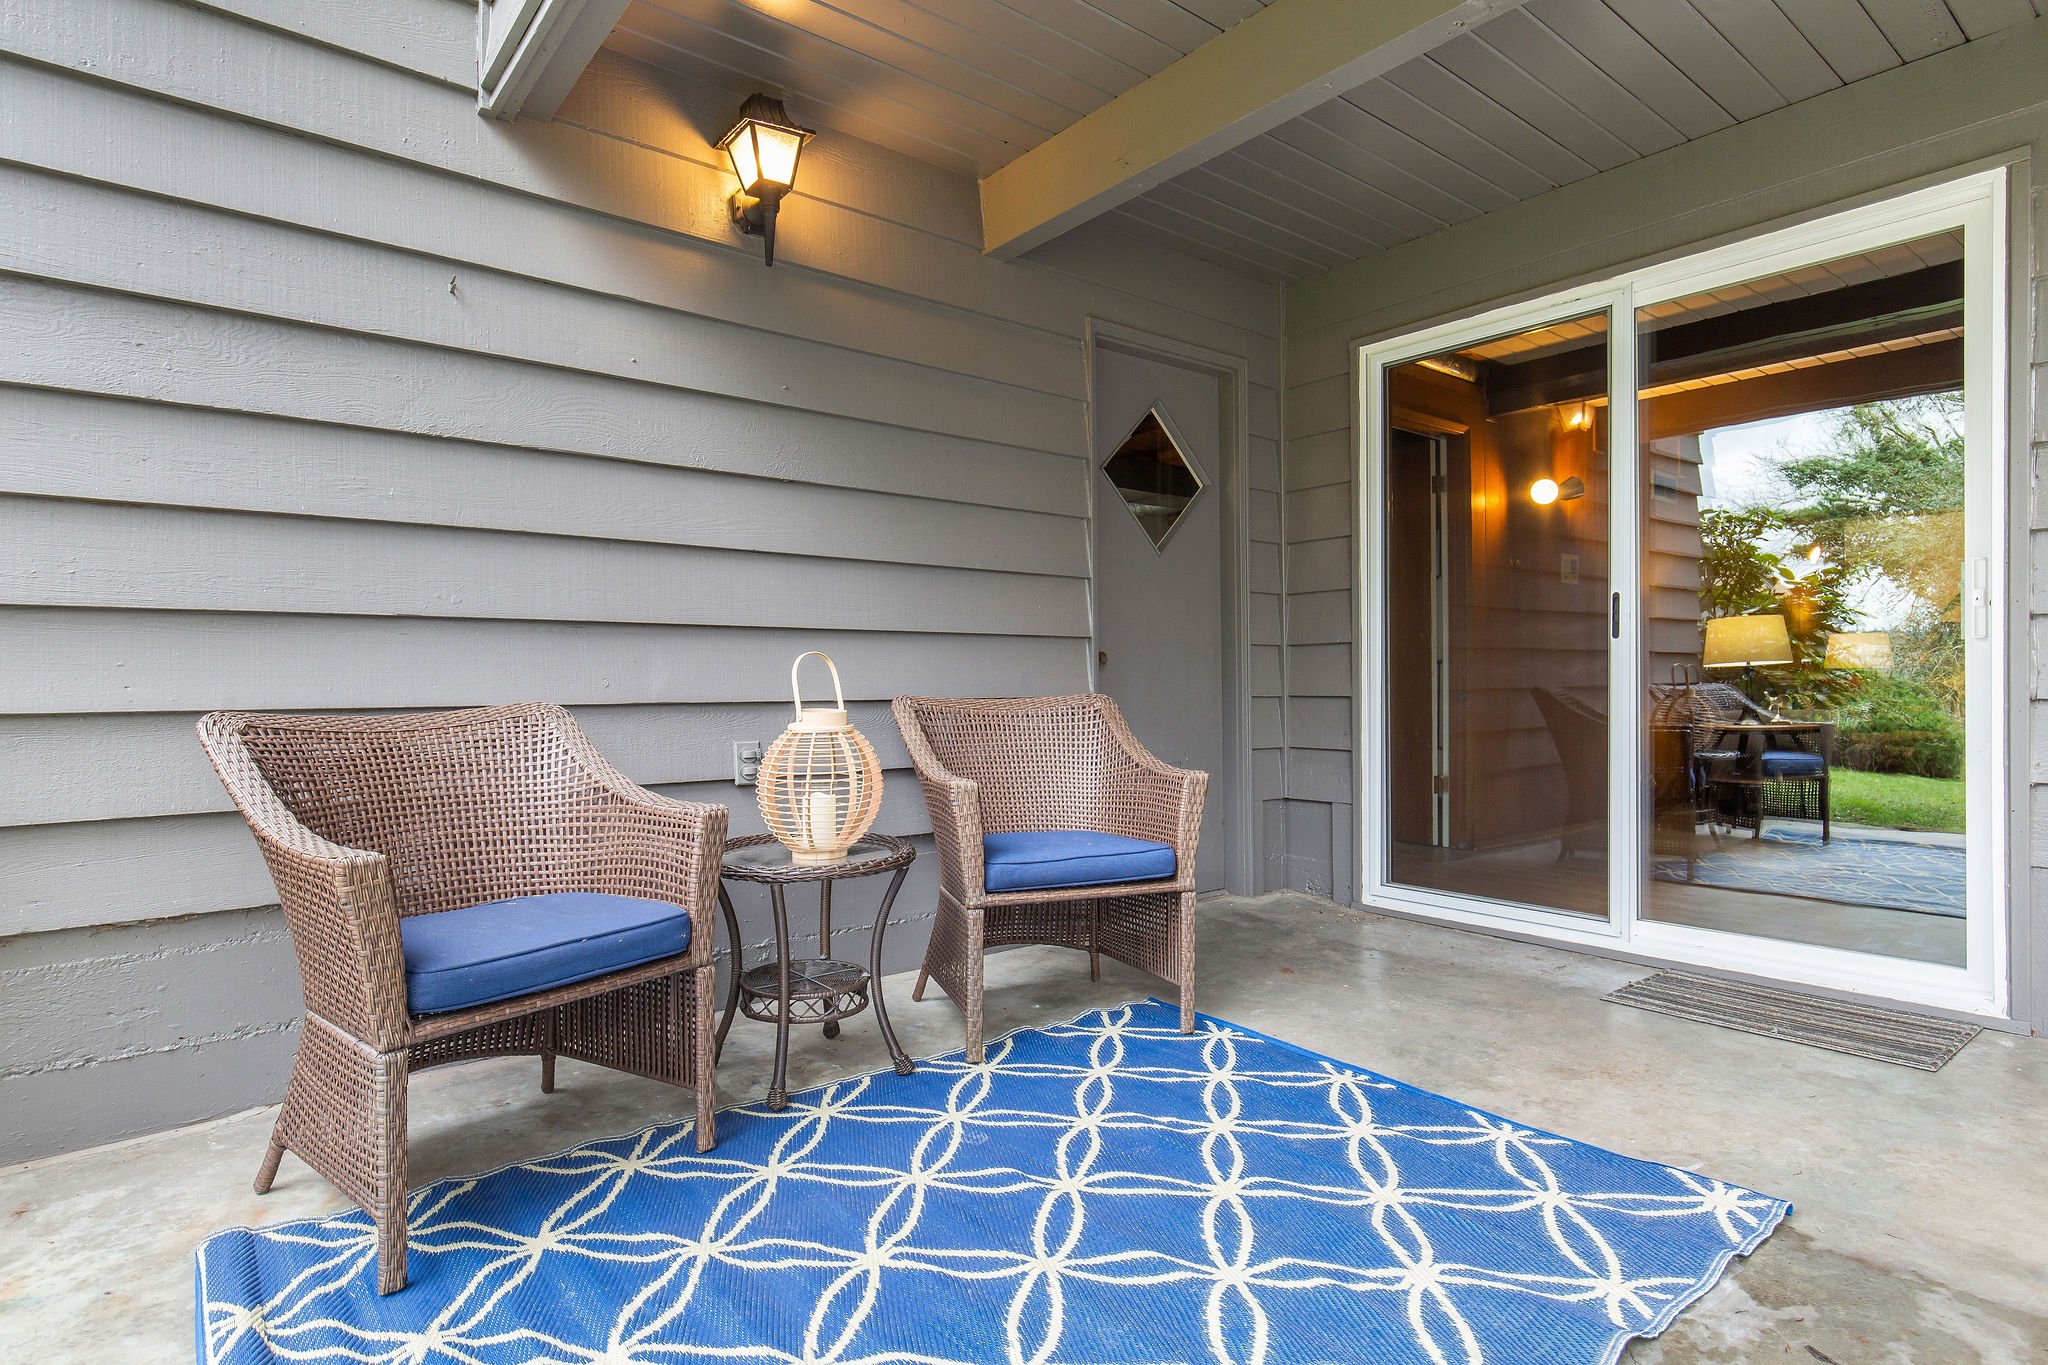  image description: exterior of patio with whicker chairs and rug 